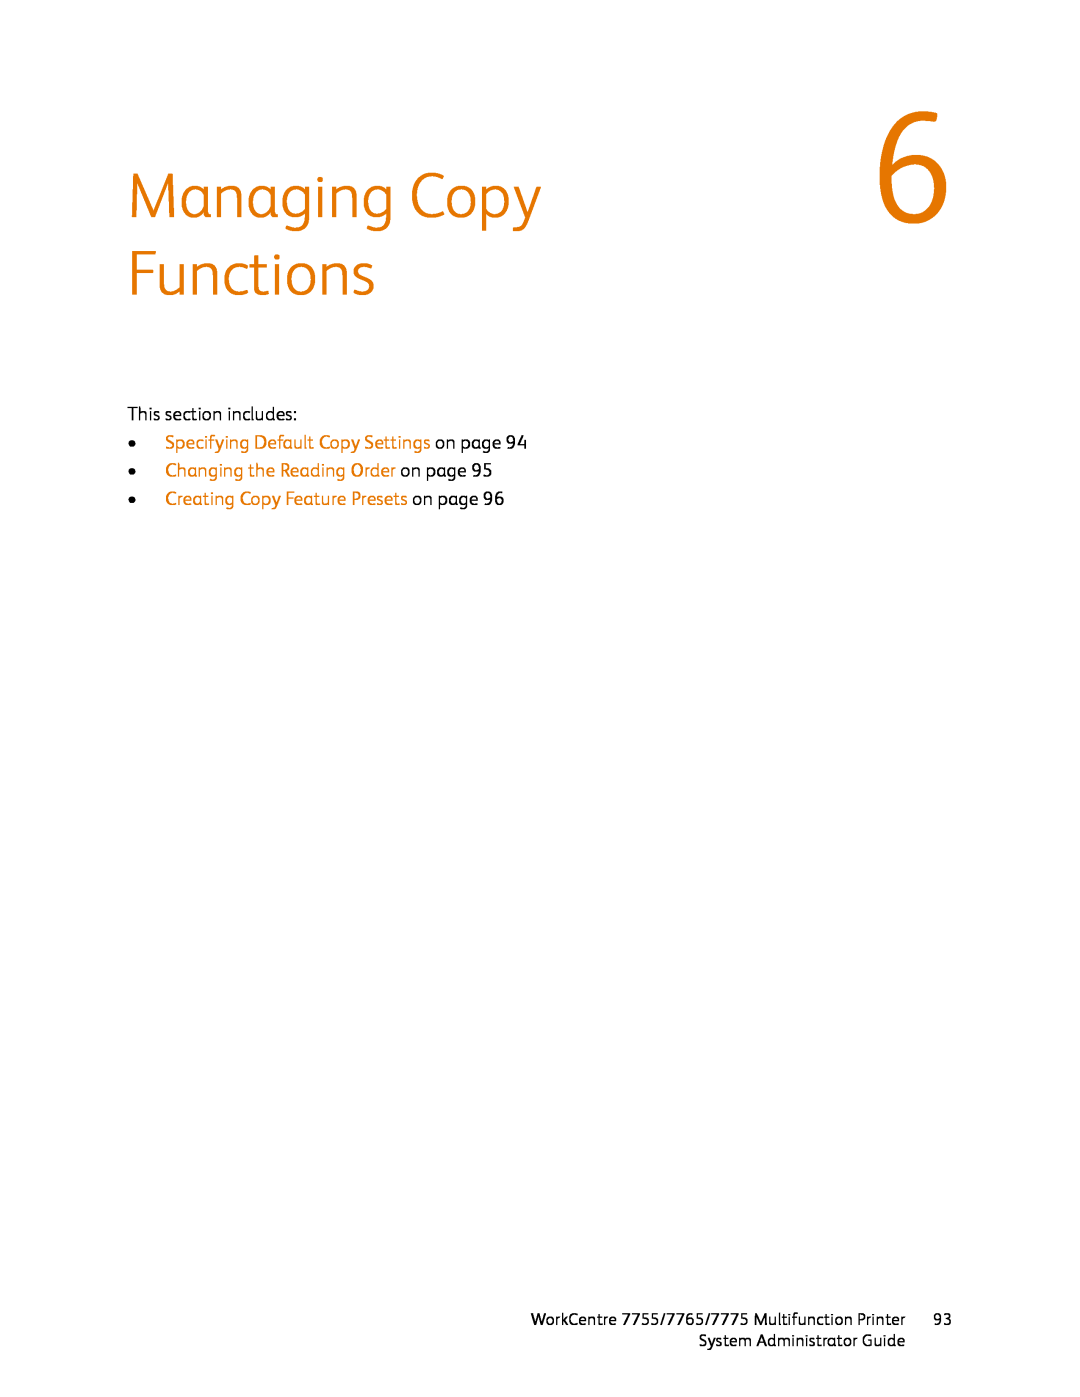 Xerox 7765, 7755 Managing Copy, Functions, •Specifying Default Copy Settings on page, •Changing the Reading Order on page 